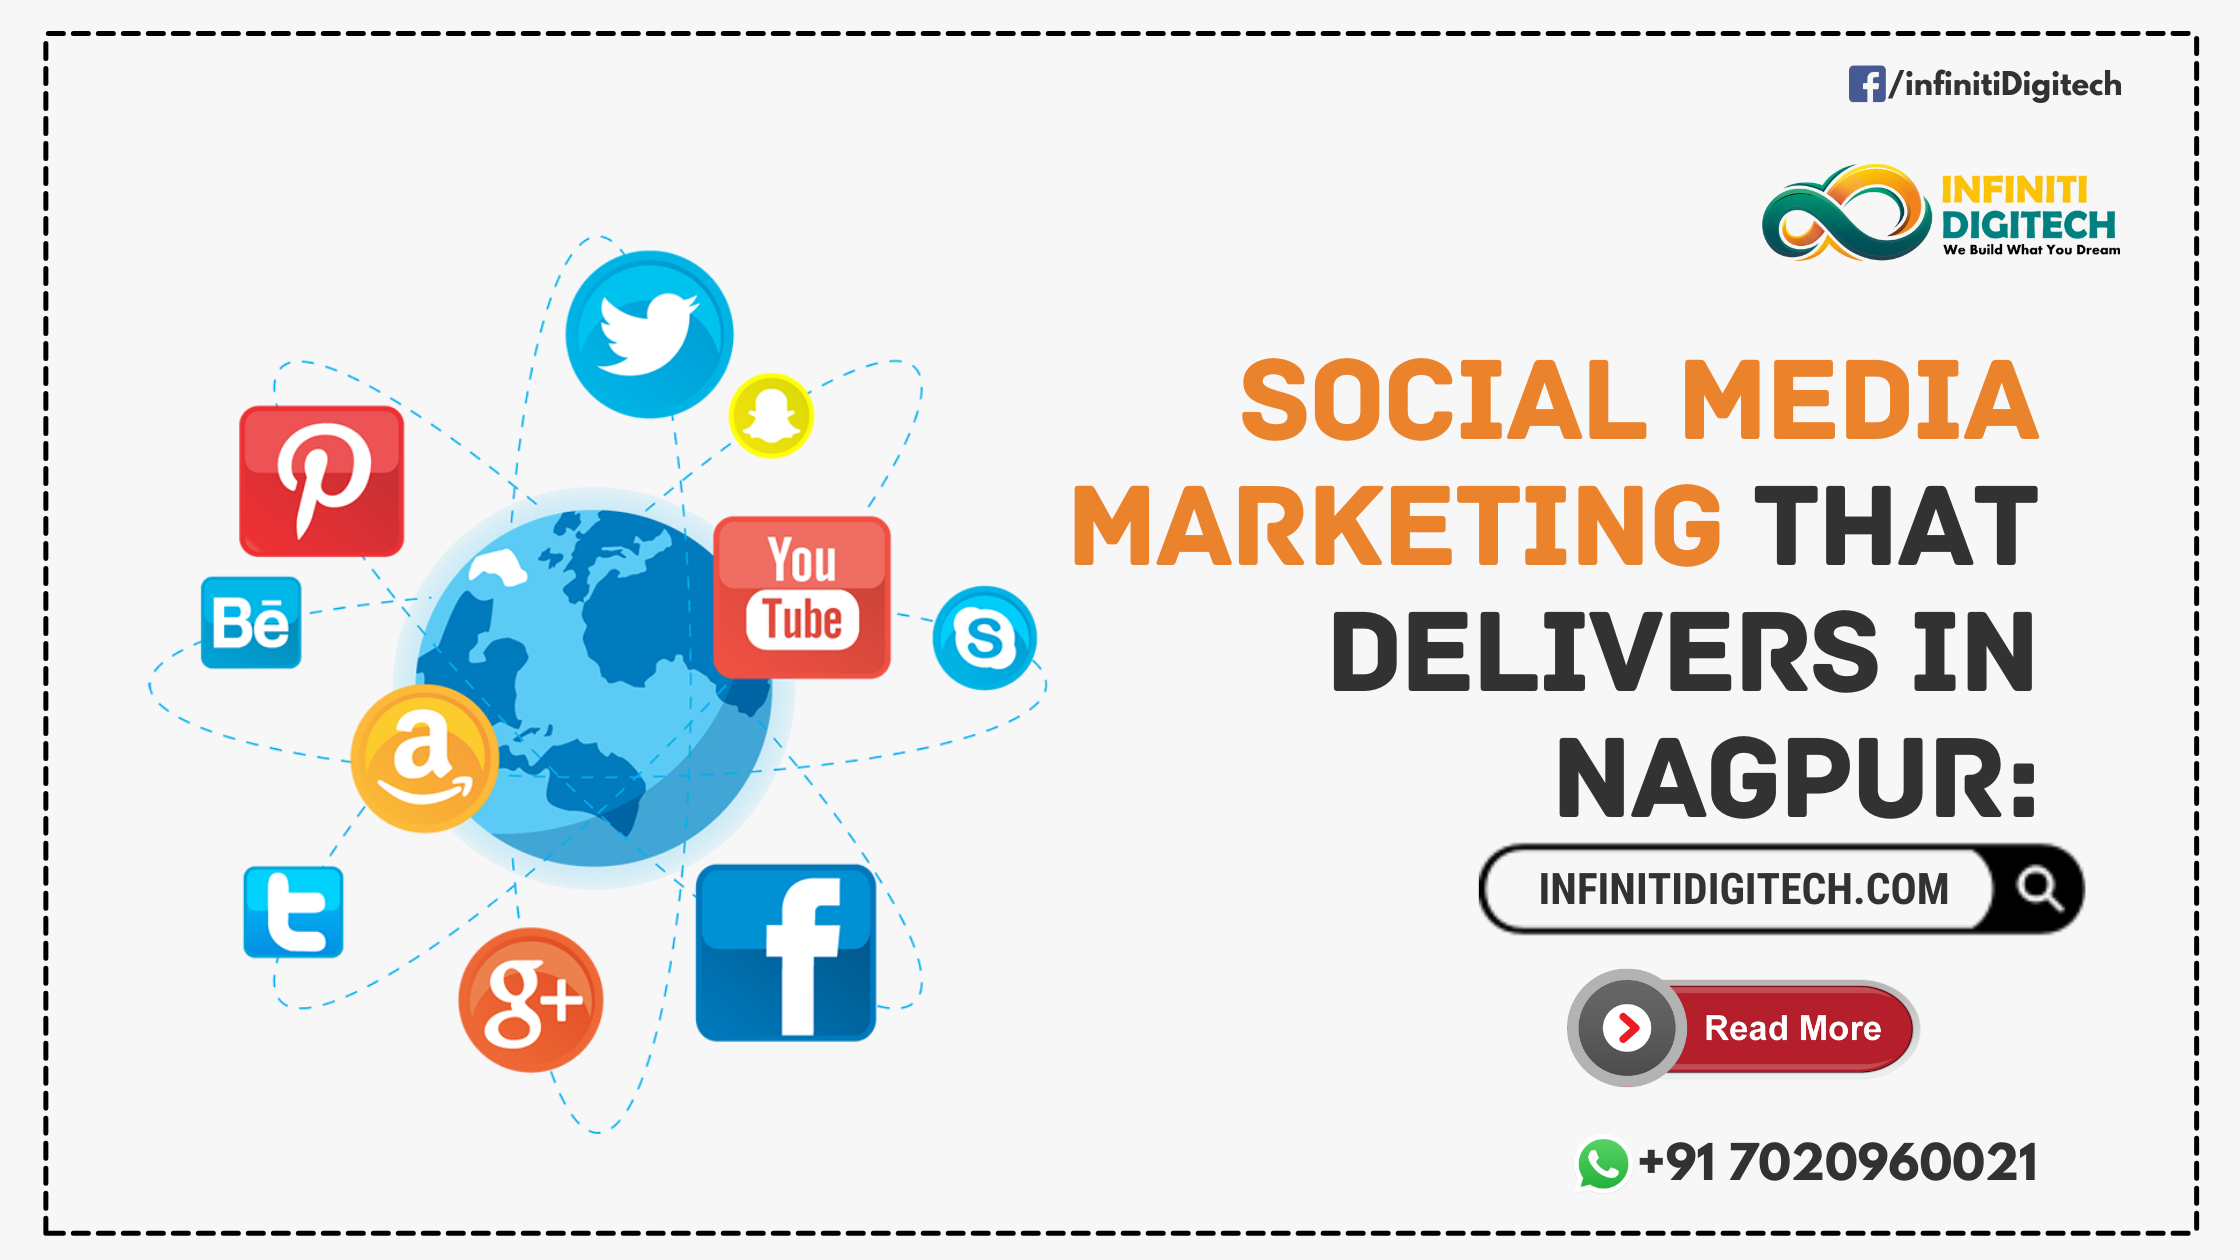 Social Media Marketing that Delivers in Nagpur: